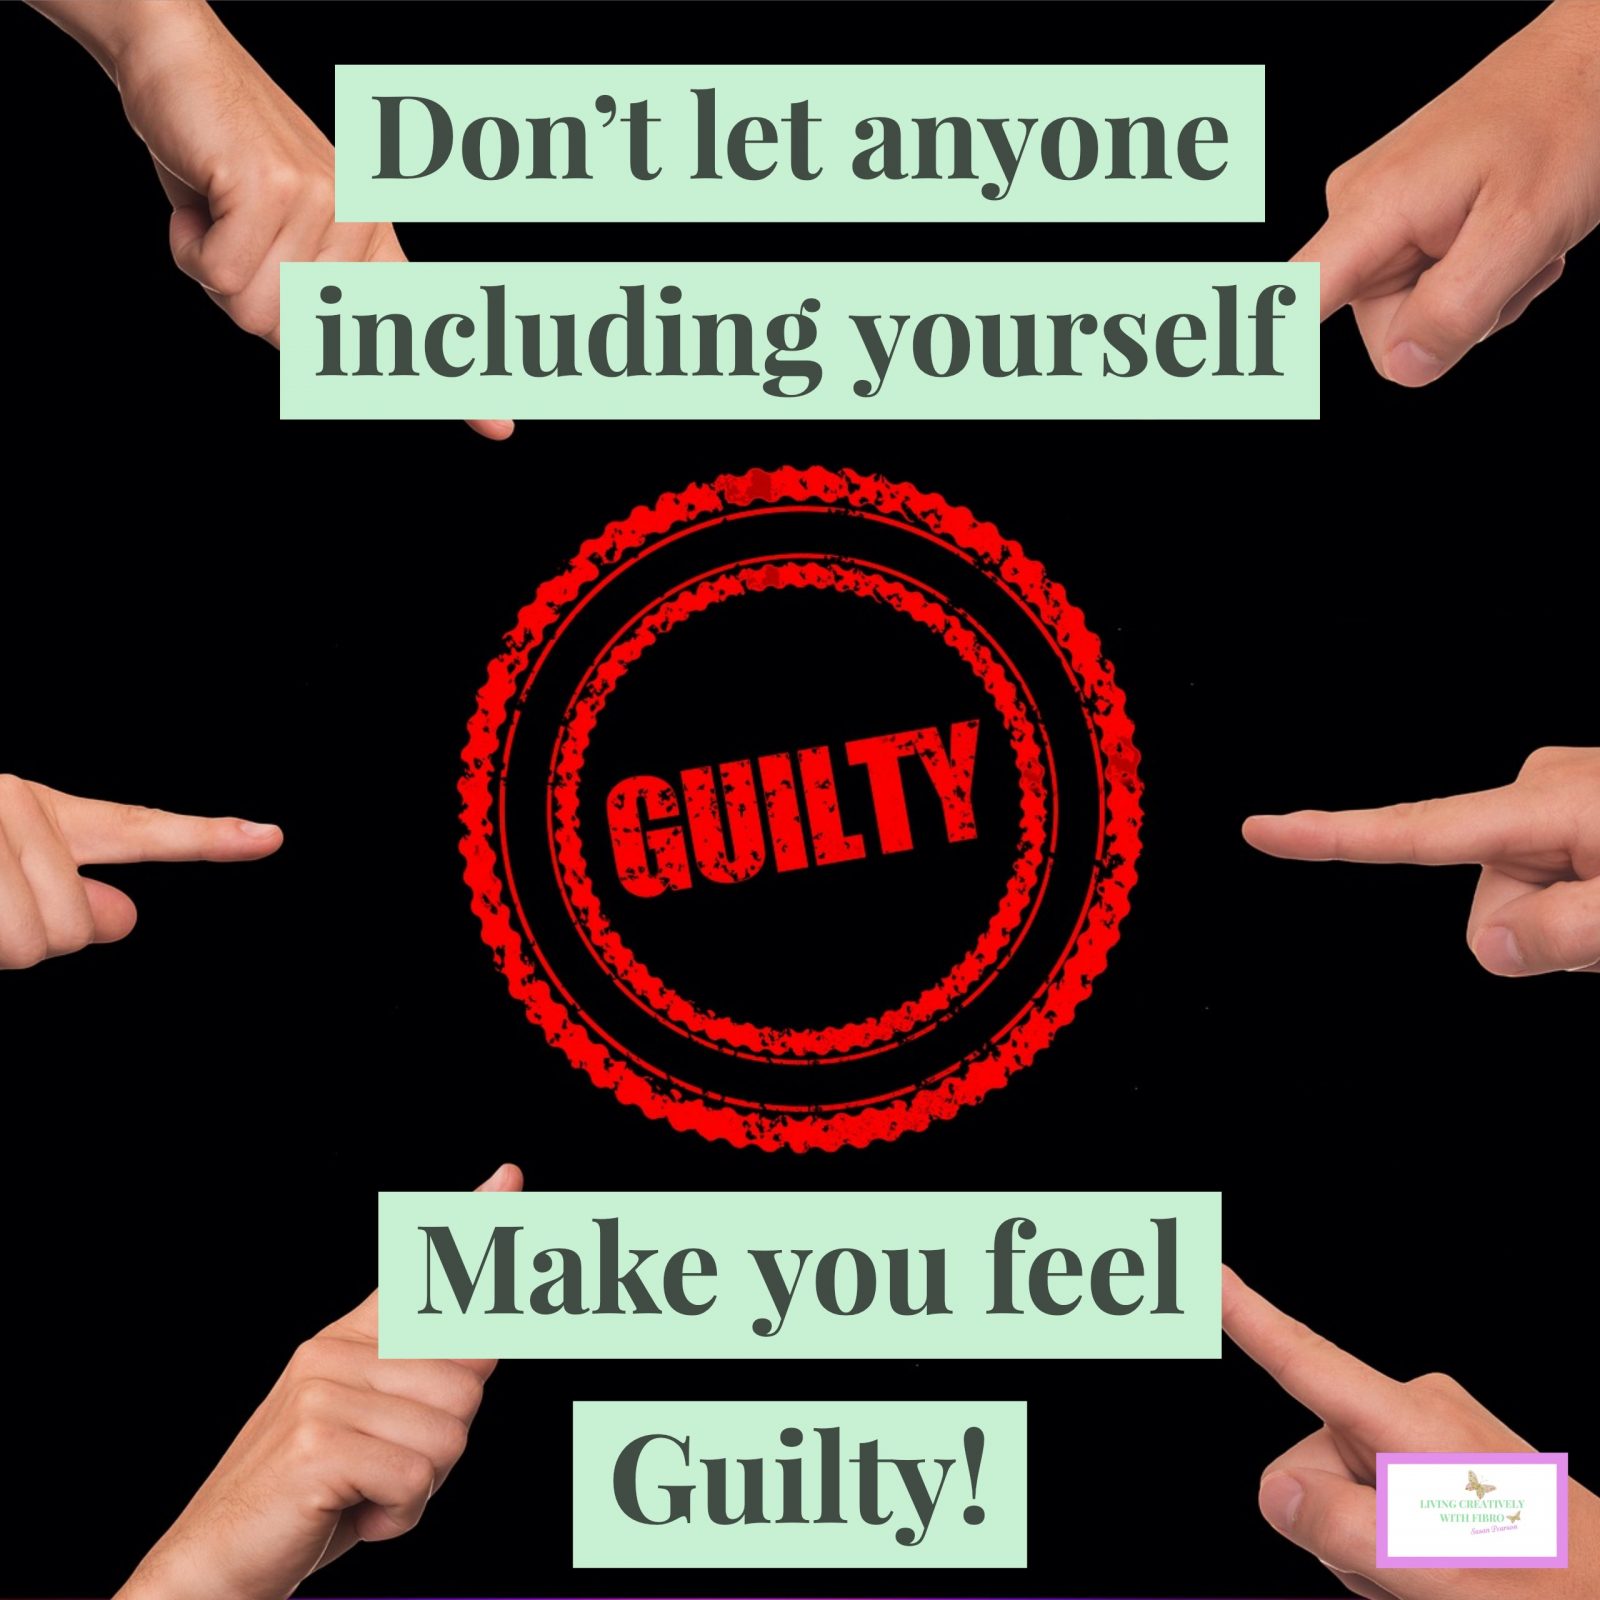 Living Creatively with Fibro | The word Guilty with six fingers pointing towards it in a circle with the words: Don't let anyone including yourself make you feel guilty